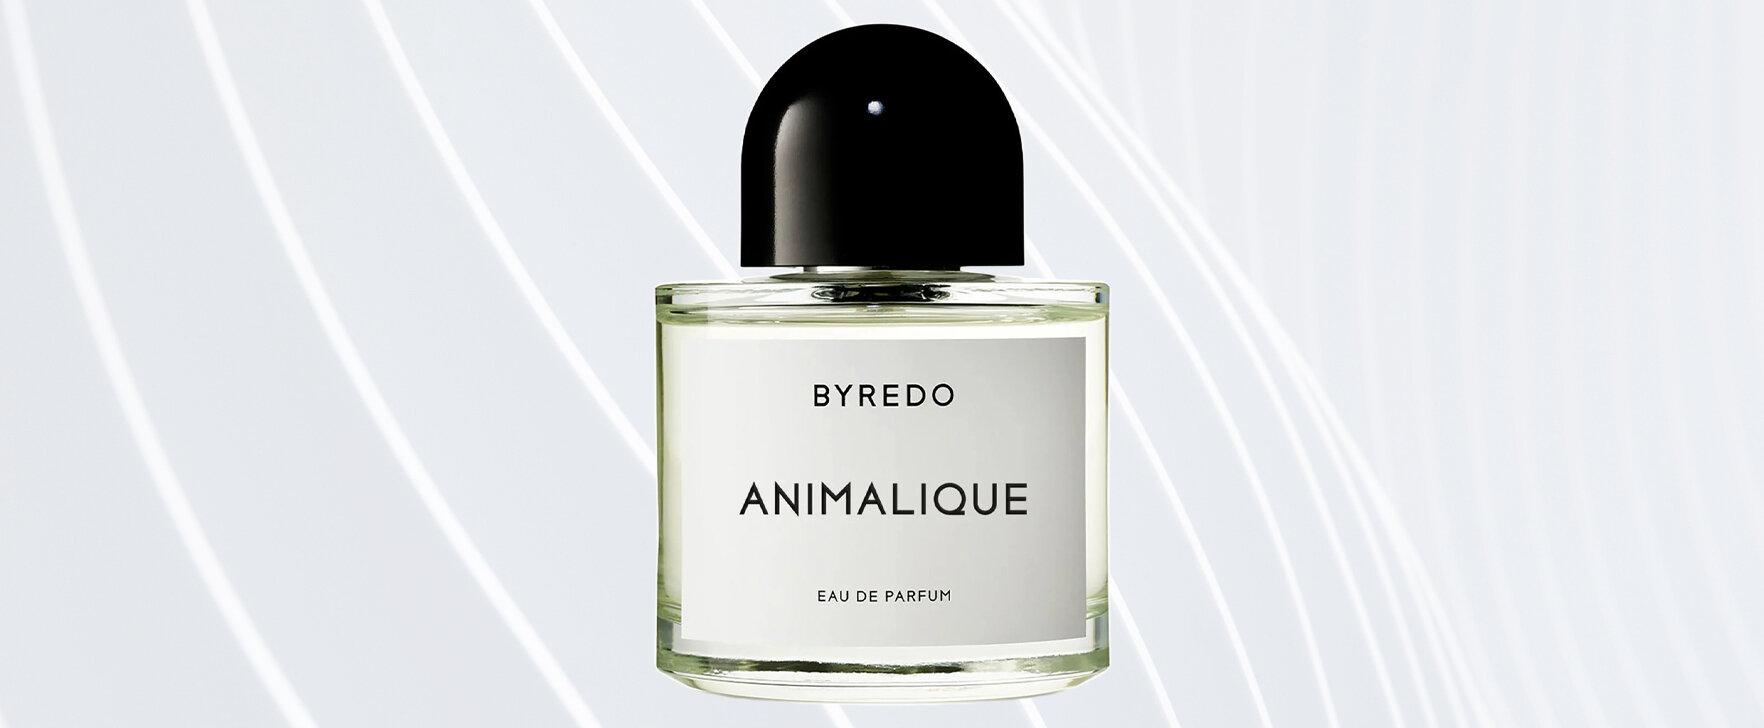 Animalique by Byredo: A Fragrance Ode to Our Spiritual Essence